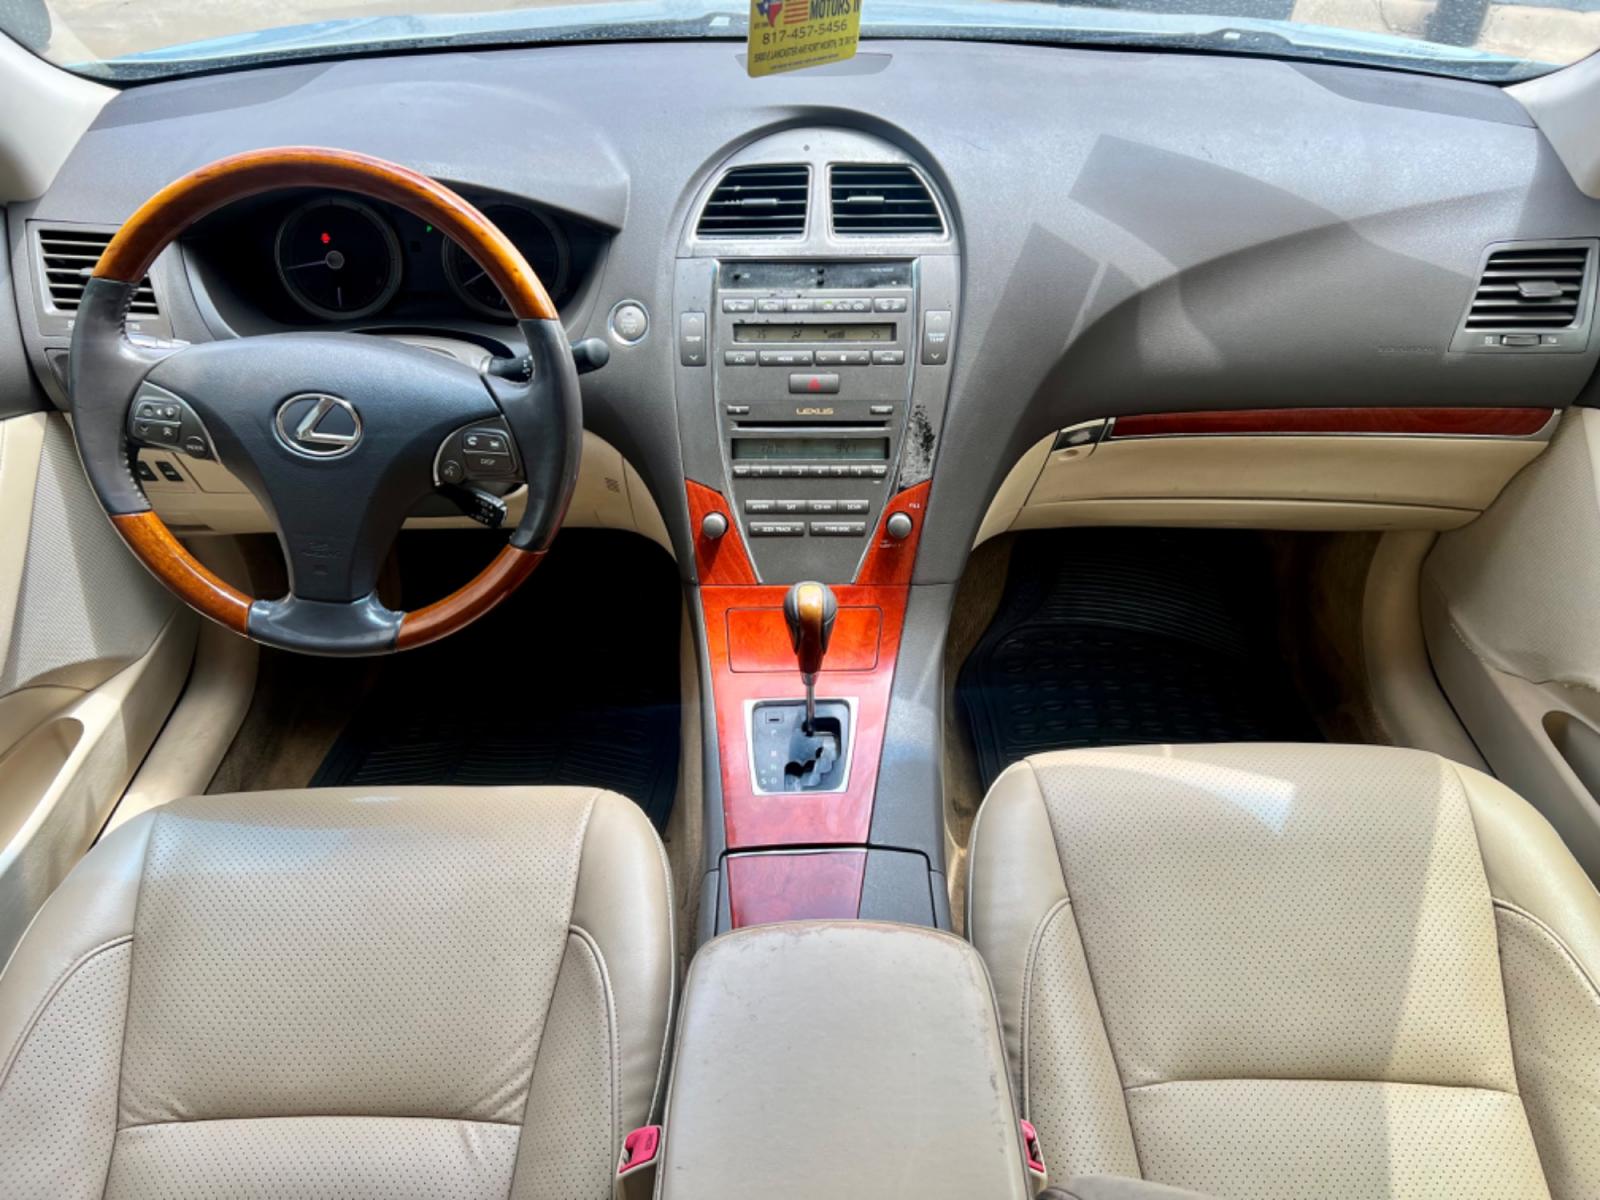 2010 BLUE /Tan LEXUS ES 350 BASE Base 4dr Sedan (JTHBK1EG3A2) with an 3.5L V6 engine, Automatic 6-Speed transmission, located at 5900 E. Lancaster Ave., Fort Worth, TX, 76112, (817) 457-5456, 0.000000, 0.000000 - Cash CASH CAR ONLY, NO FINANCING AVAILABLE. THIS 2010 LEXUS ES 350 BASE 4 DOOR SEDAN RUNS AND DRIVES GREAT. IT IS EQUIPPED WITH A CD PLAYER, AM/FM RADIO AND AN AUX PORT. THE TIRES ARE IN GOOD CONDITION AND STILL HAVE TREAD LEFT ON THEM. THIS CAR WILL NOT LAST SO ACT FAST! Call or text Fran - Photo #18